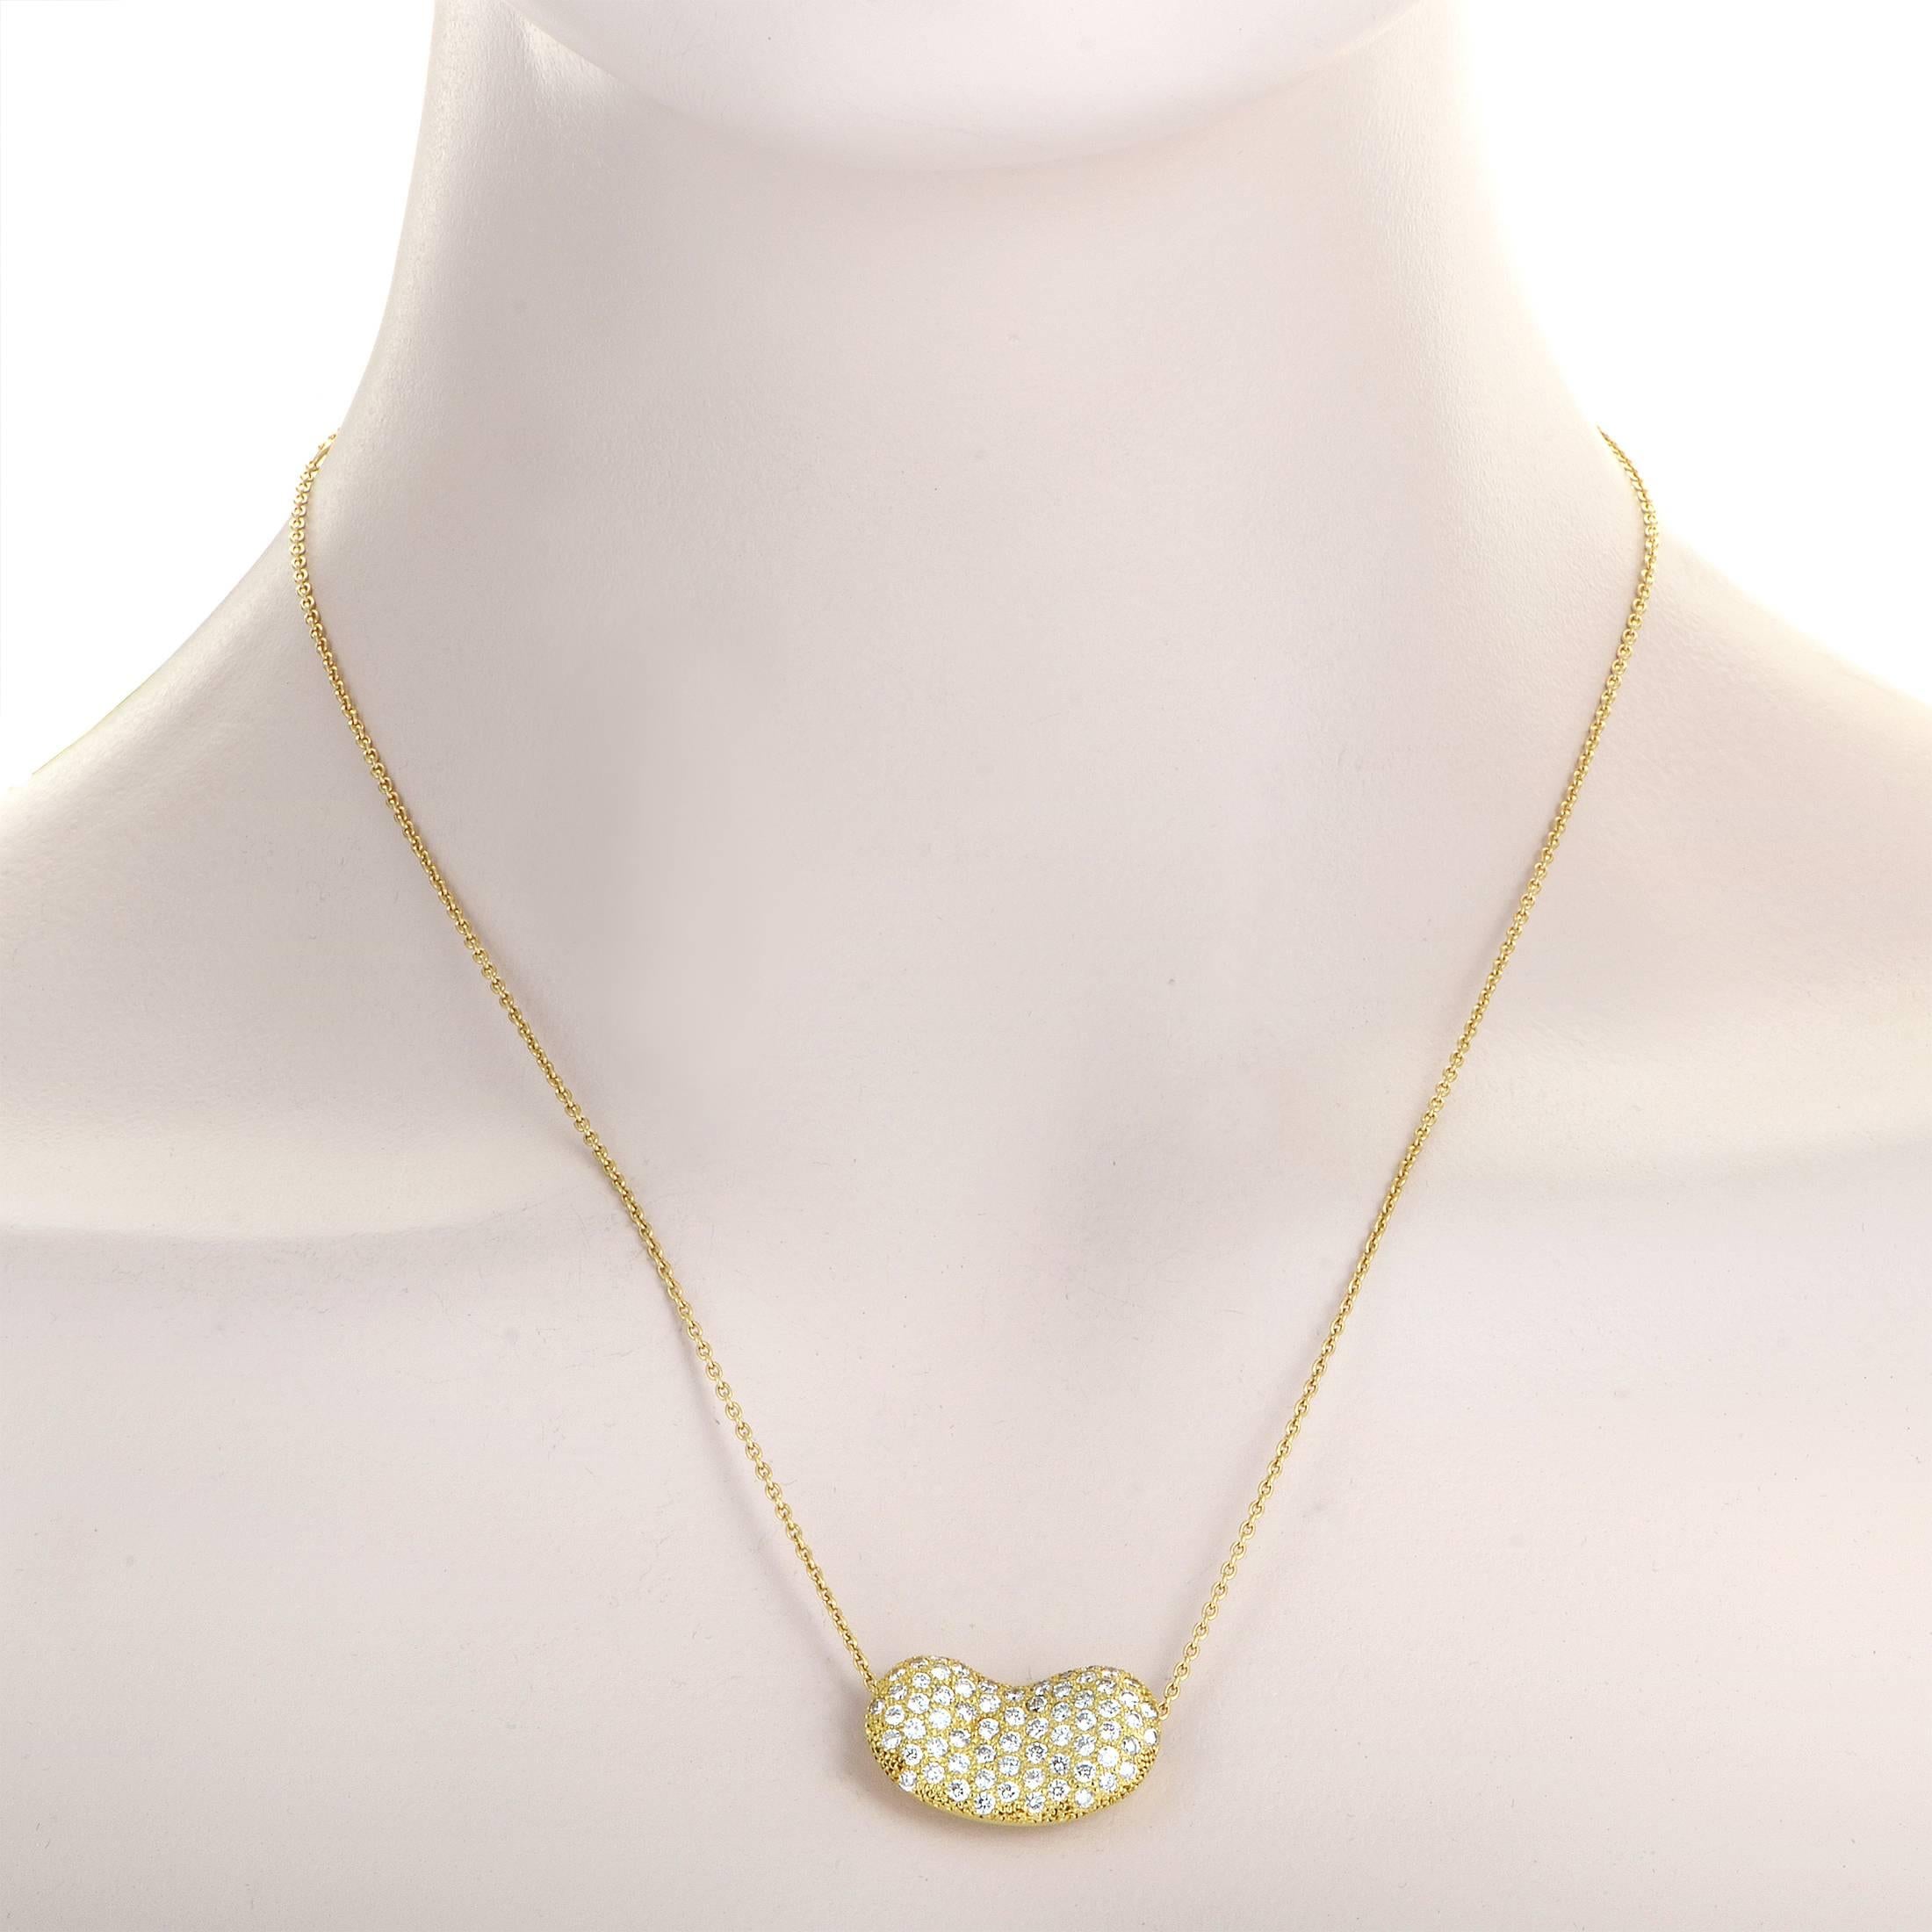 Relying on the tasteful blend of precious 18K yellow gold and lustrous diamonds weighing in total 2.04 carats to create an alluring sense of classic luxury, this marvelous necklace designed by Elsa Peretti for Tiffany & Co. offers a charming and